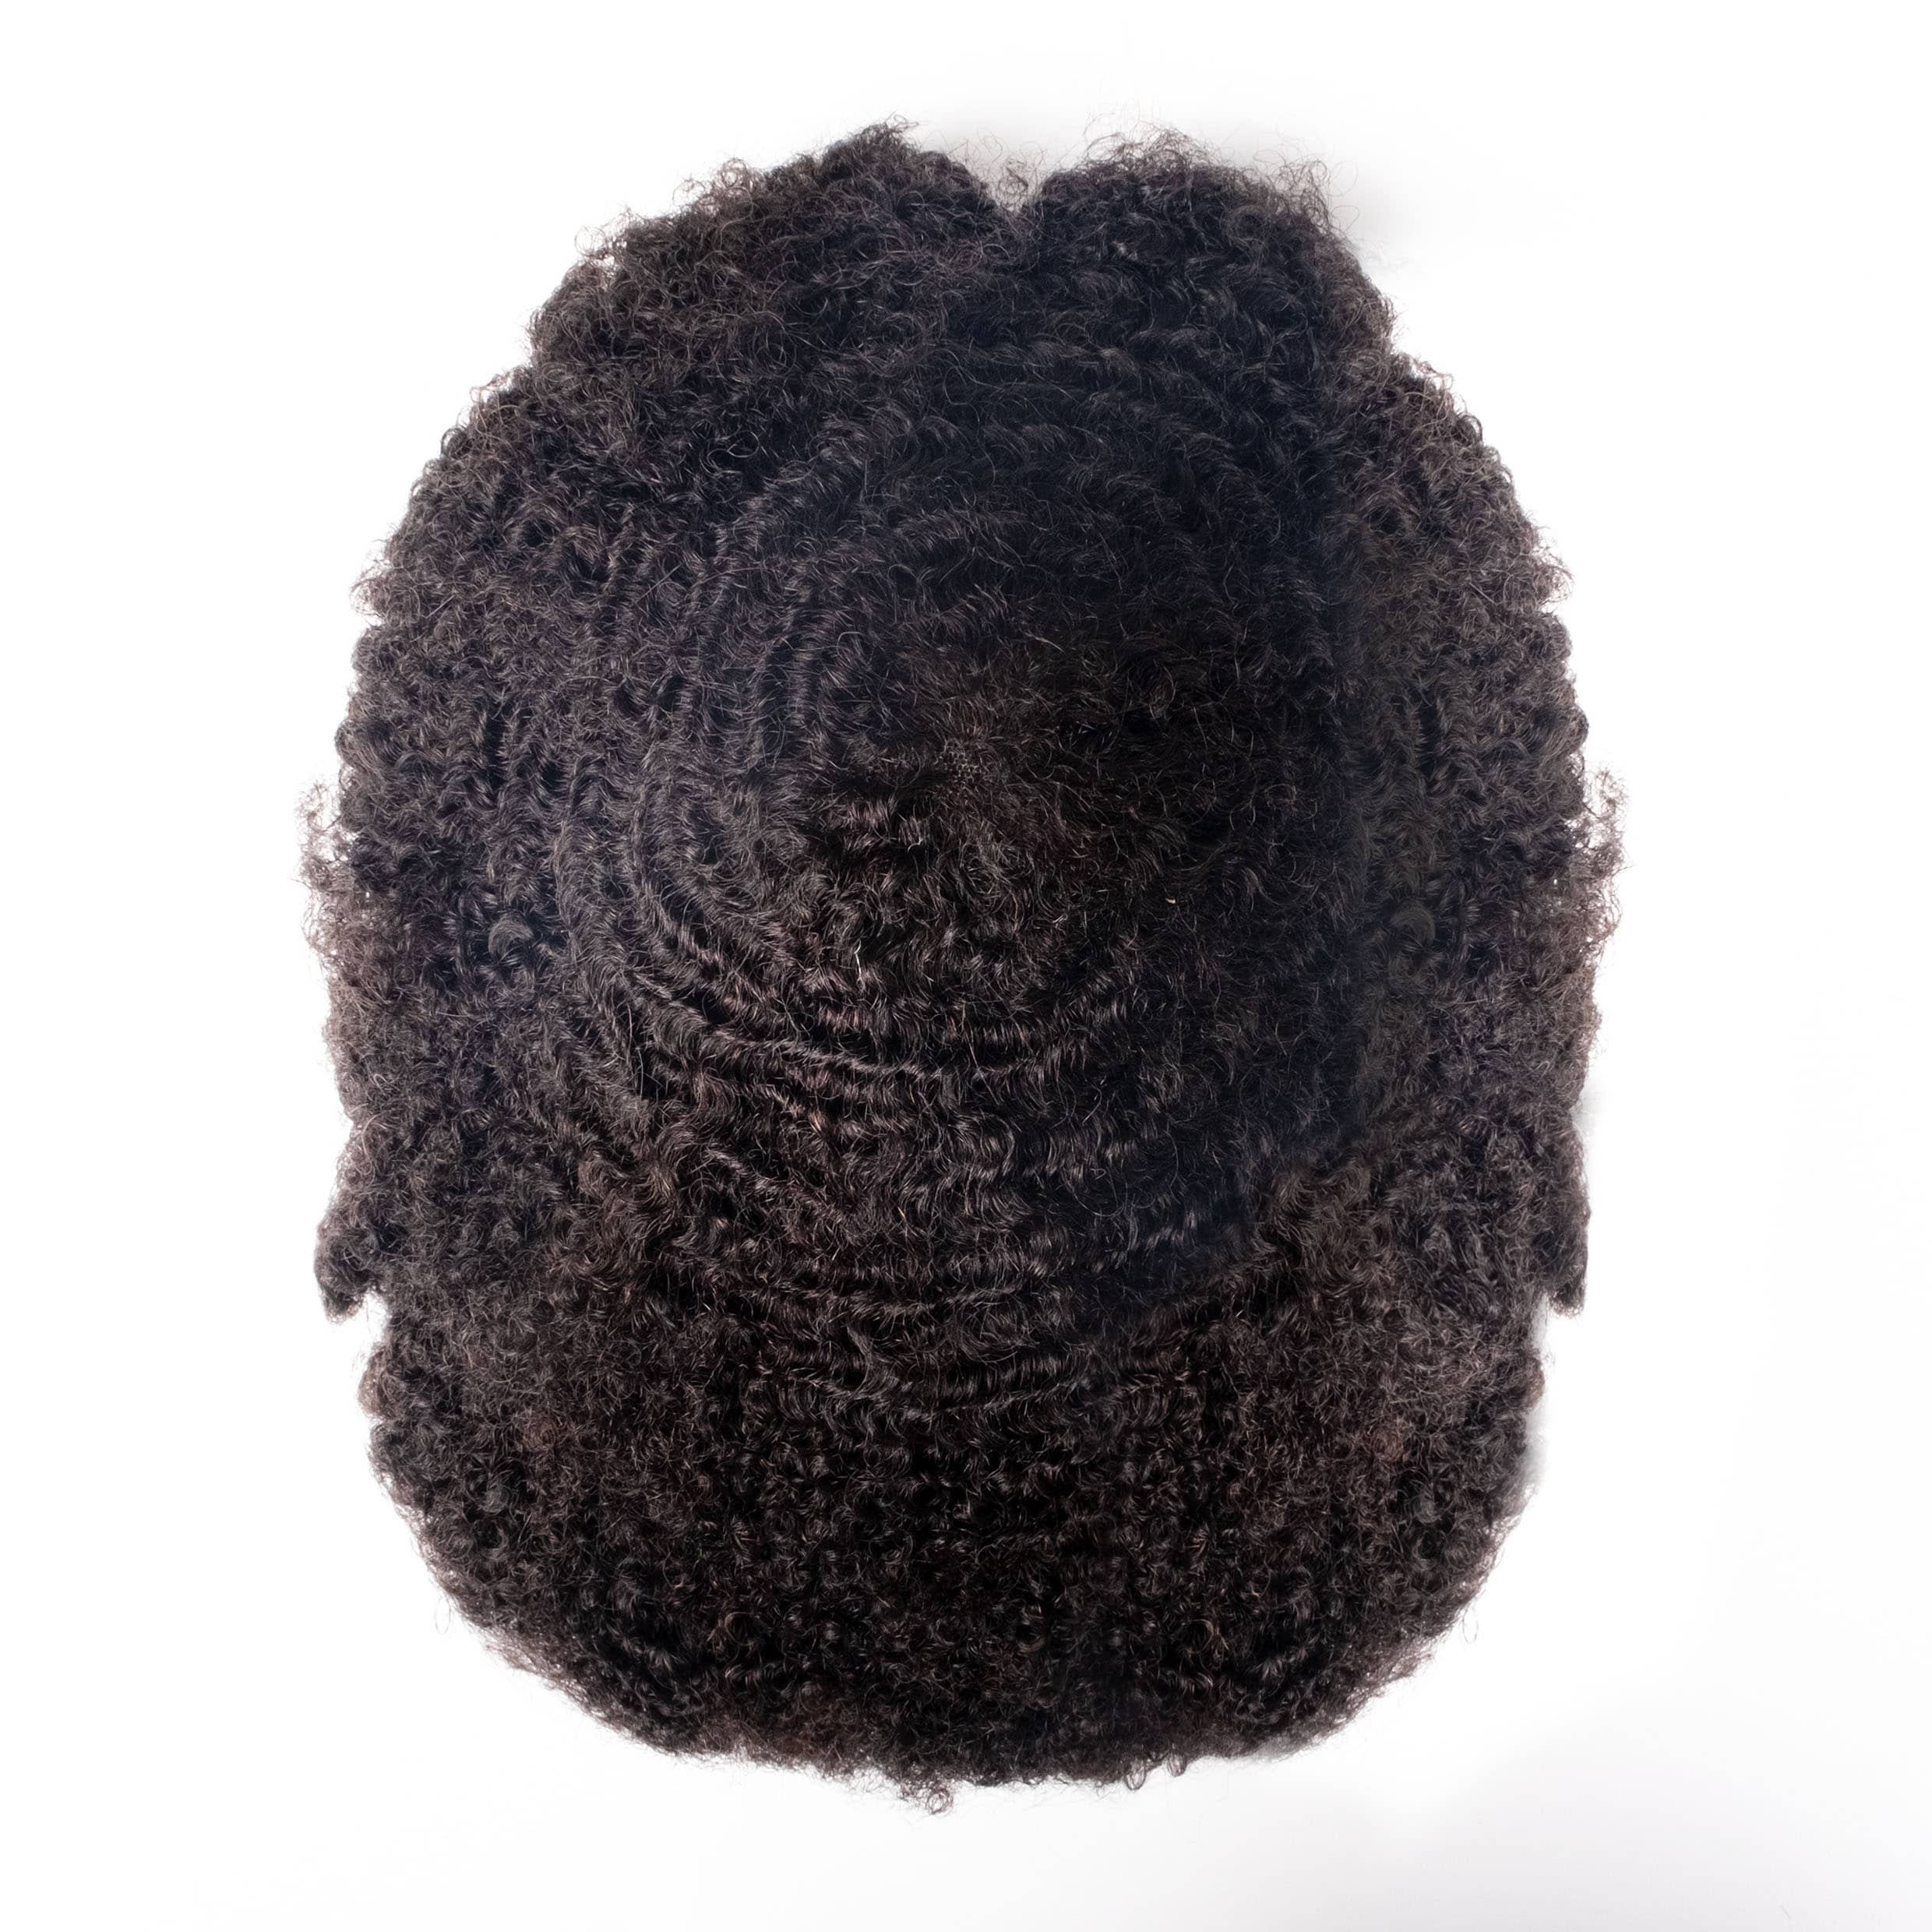 GEXWIGS African American Afro Men’s Hair System with 0.12mm V-looped Skin Base